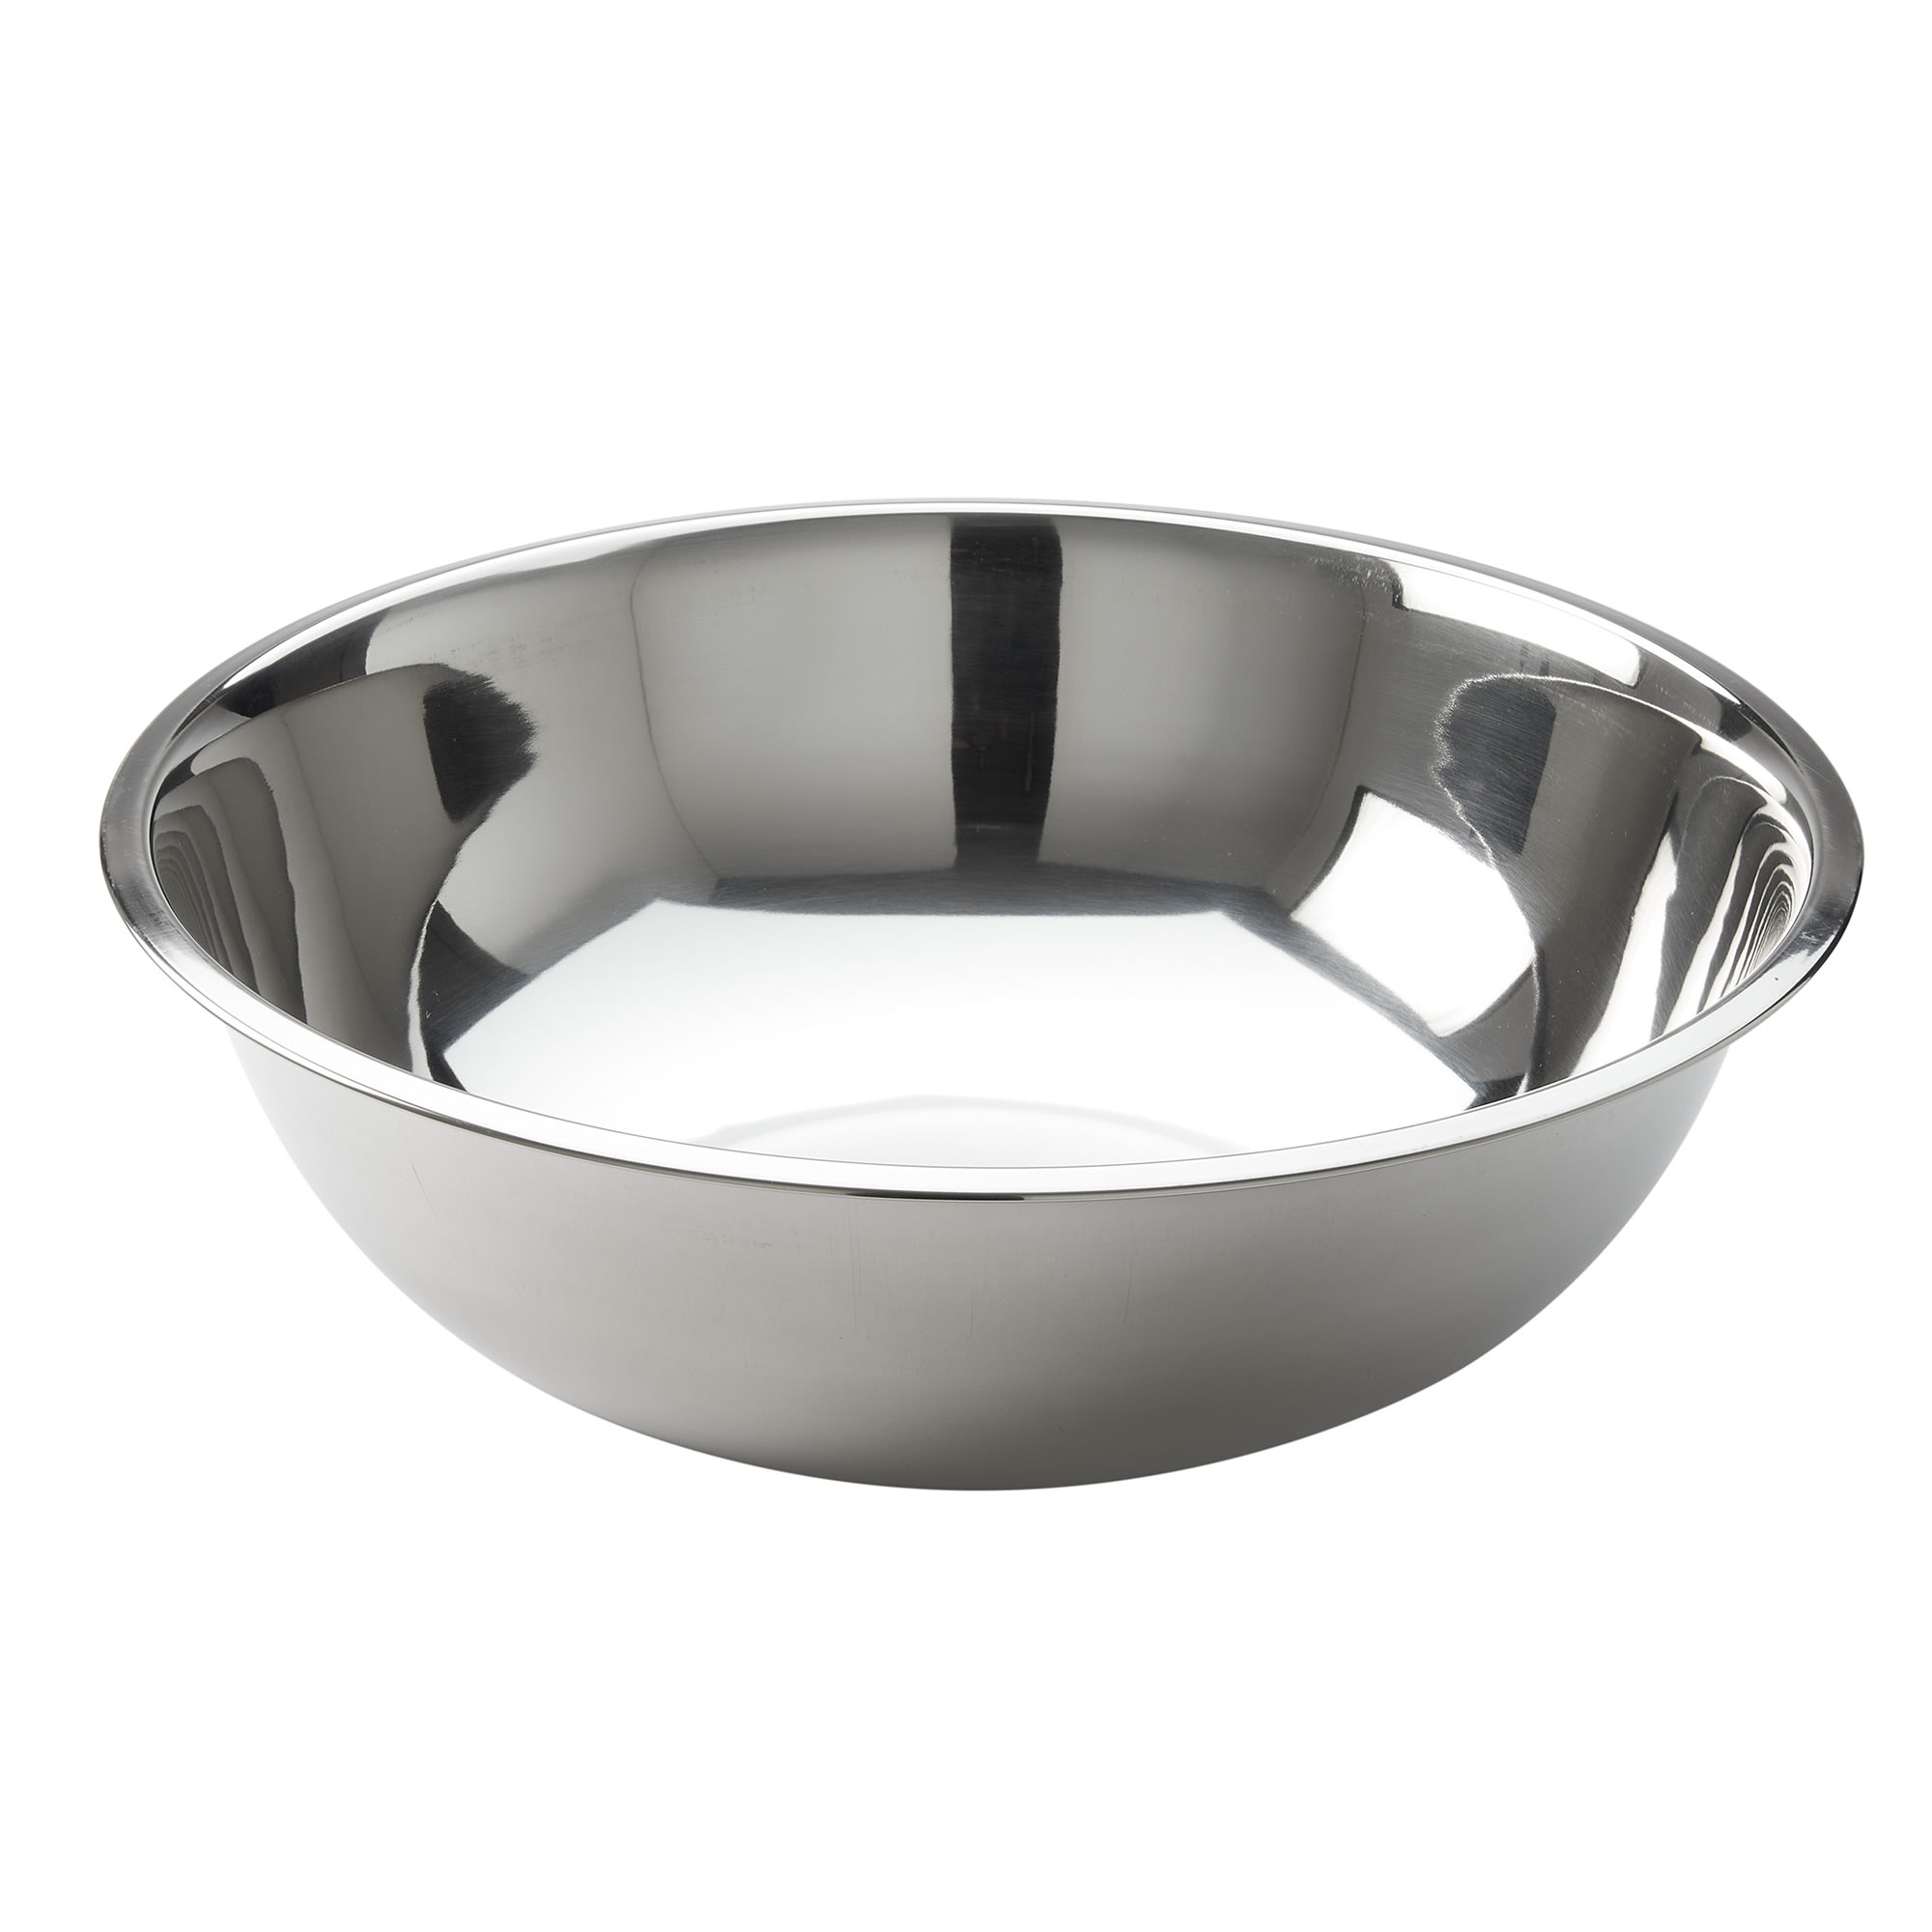 Mixing Bowl, 13 Qt, Stainless Steel, Vollrath 69130